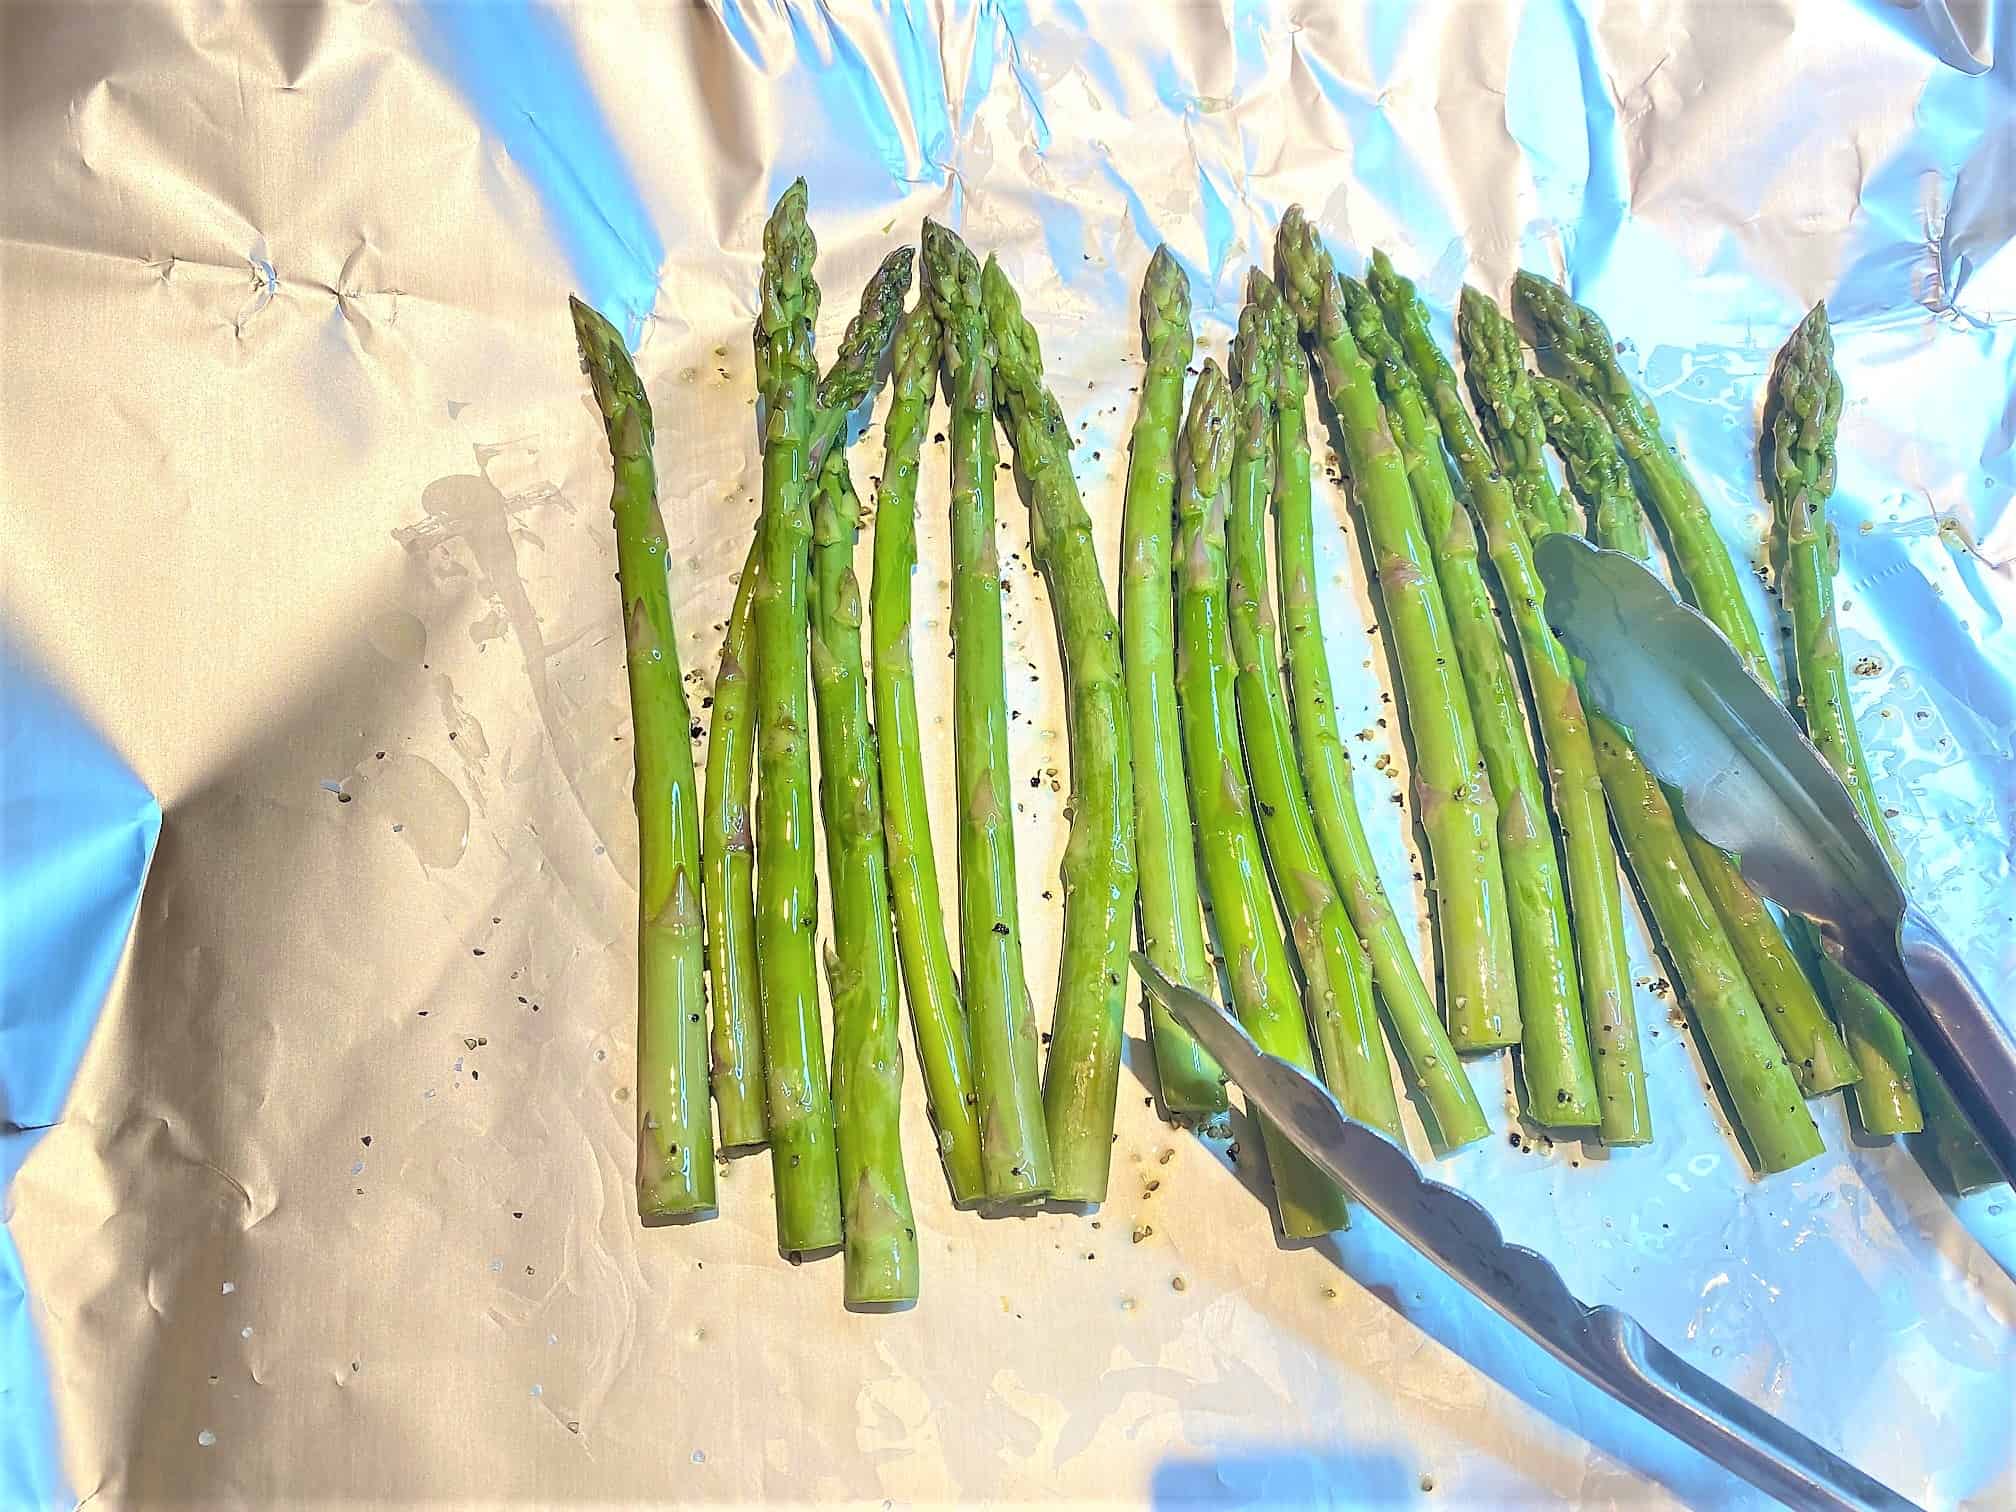 Tongs tossing asparagus in seasonings on shiny foil